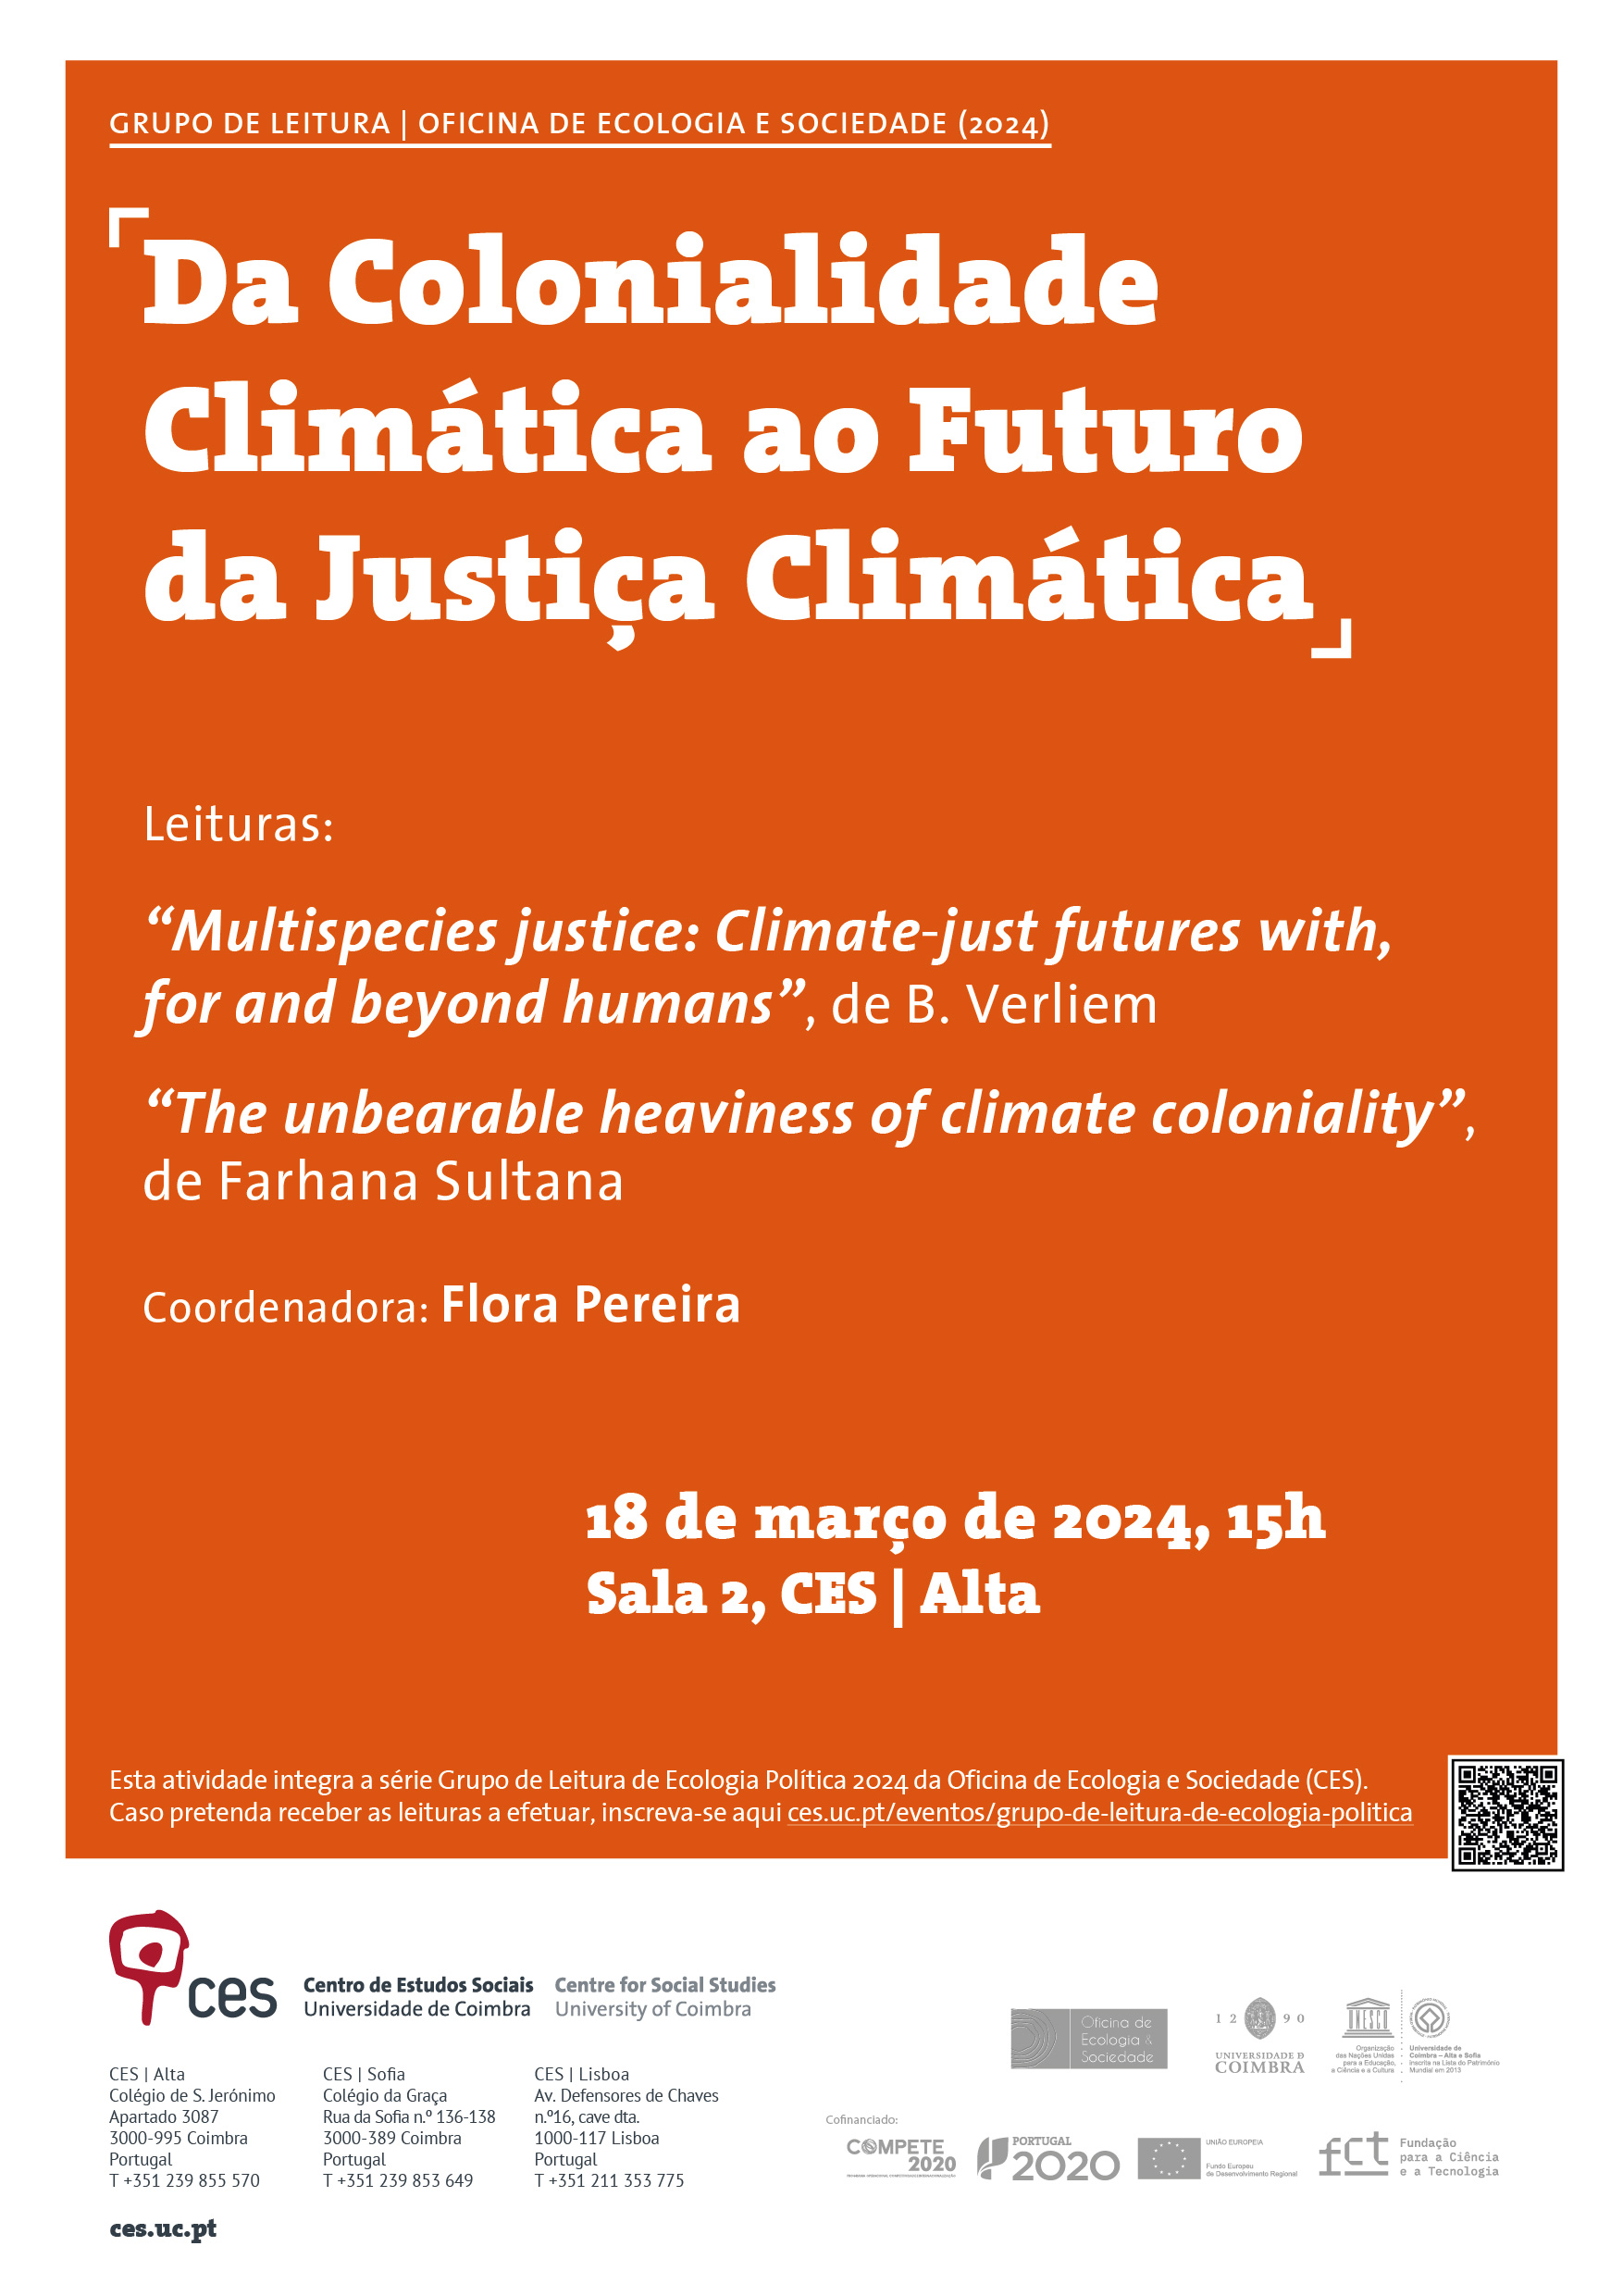 March: From Climate Coloniality to Climate Justice Futures<span id="edit_44821"><script>$(function() { $('#edit_44821').load( "/myces/user/editobj.php?tipo=evento&id=44821" ); });</script></span>